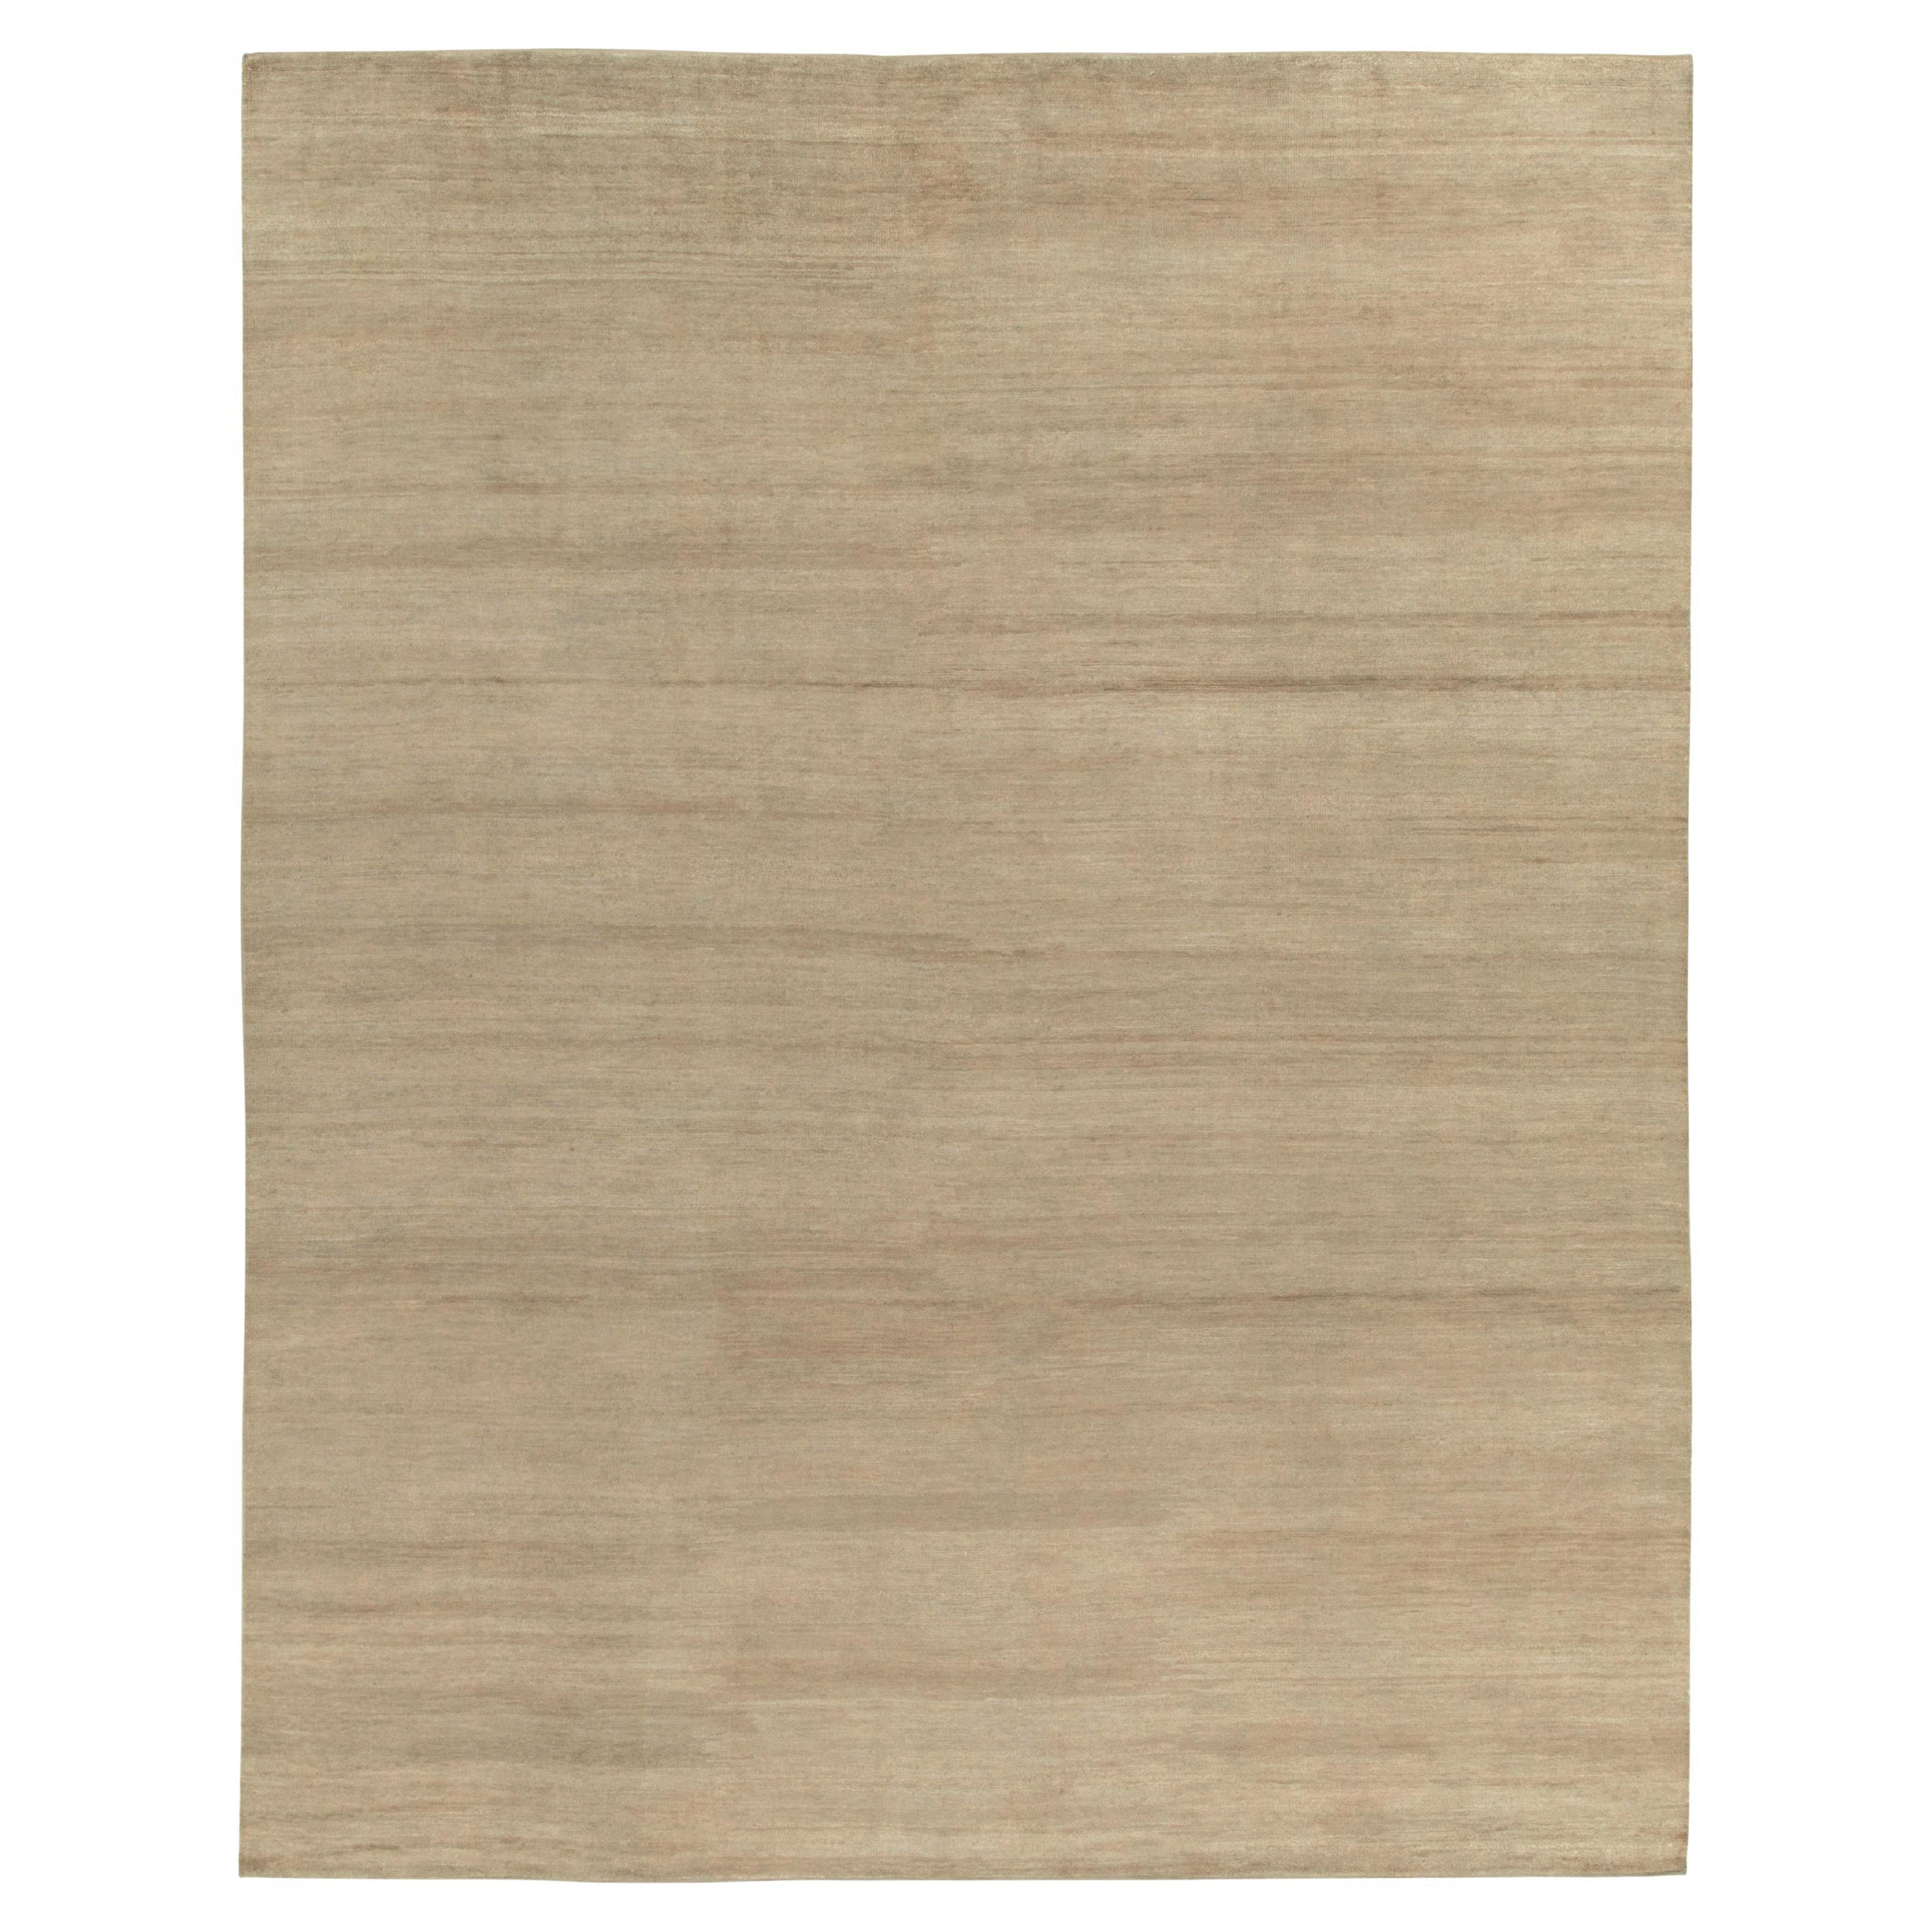 Rug & Kilim's Hand-Knotted Contemporary Solid Beige-Brown Rug